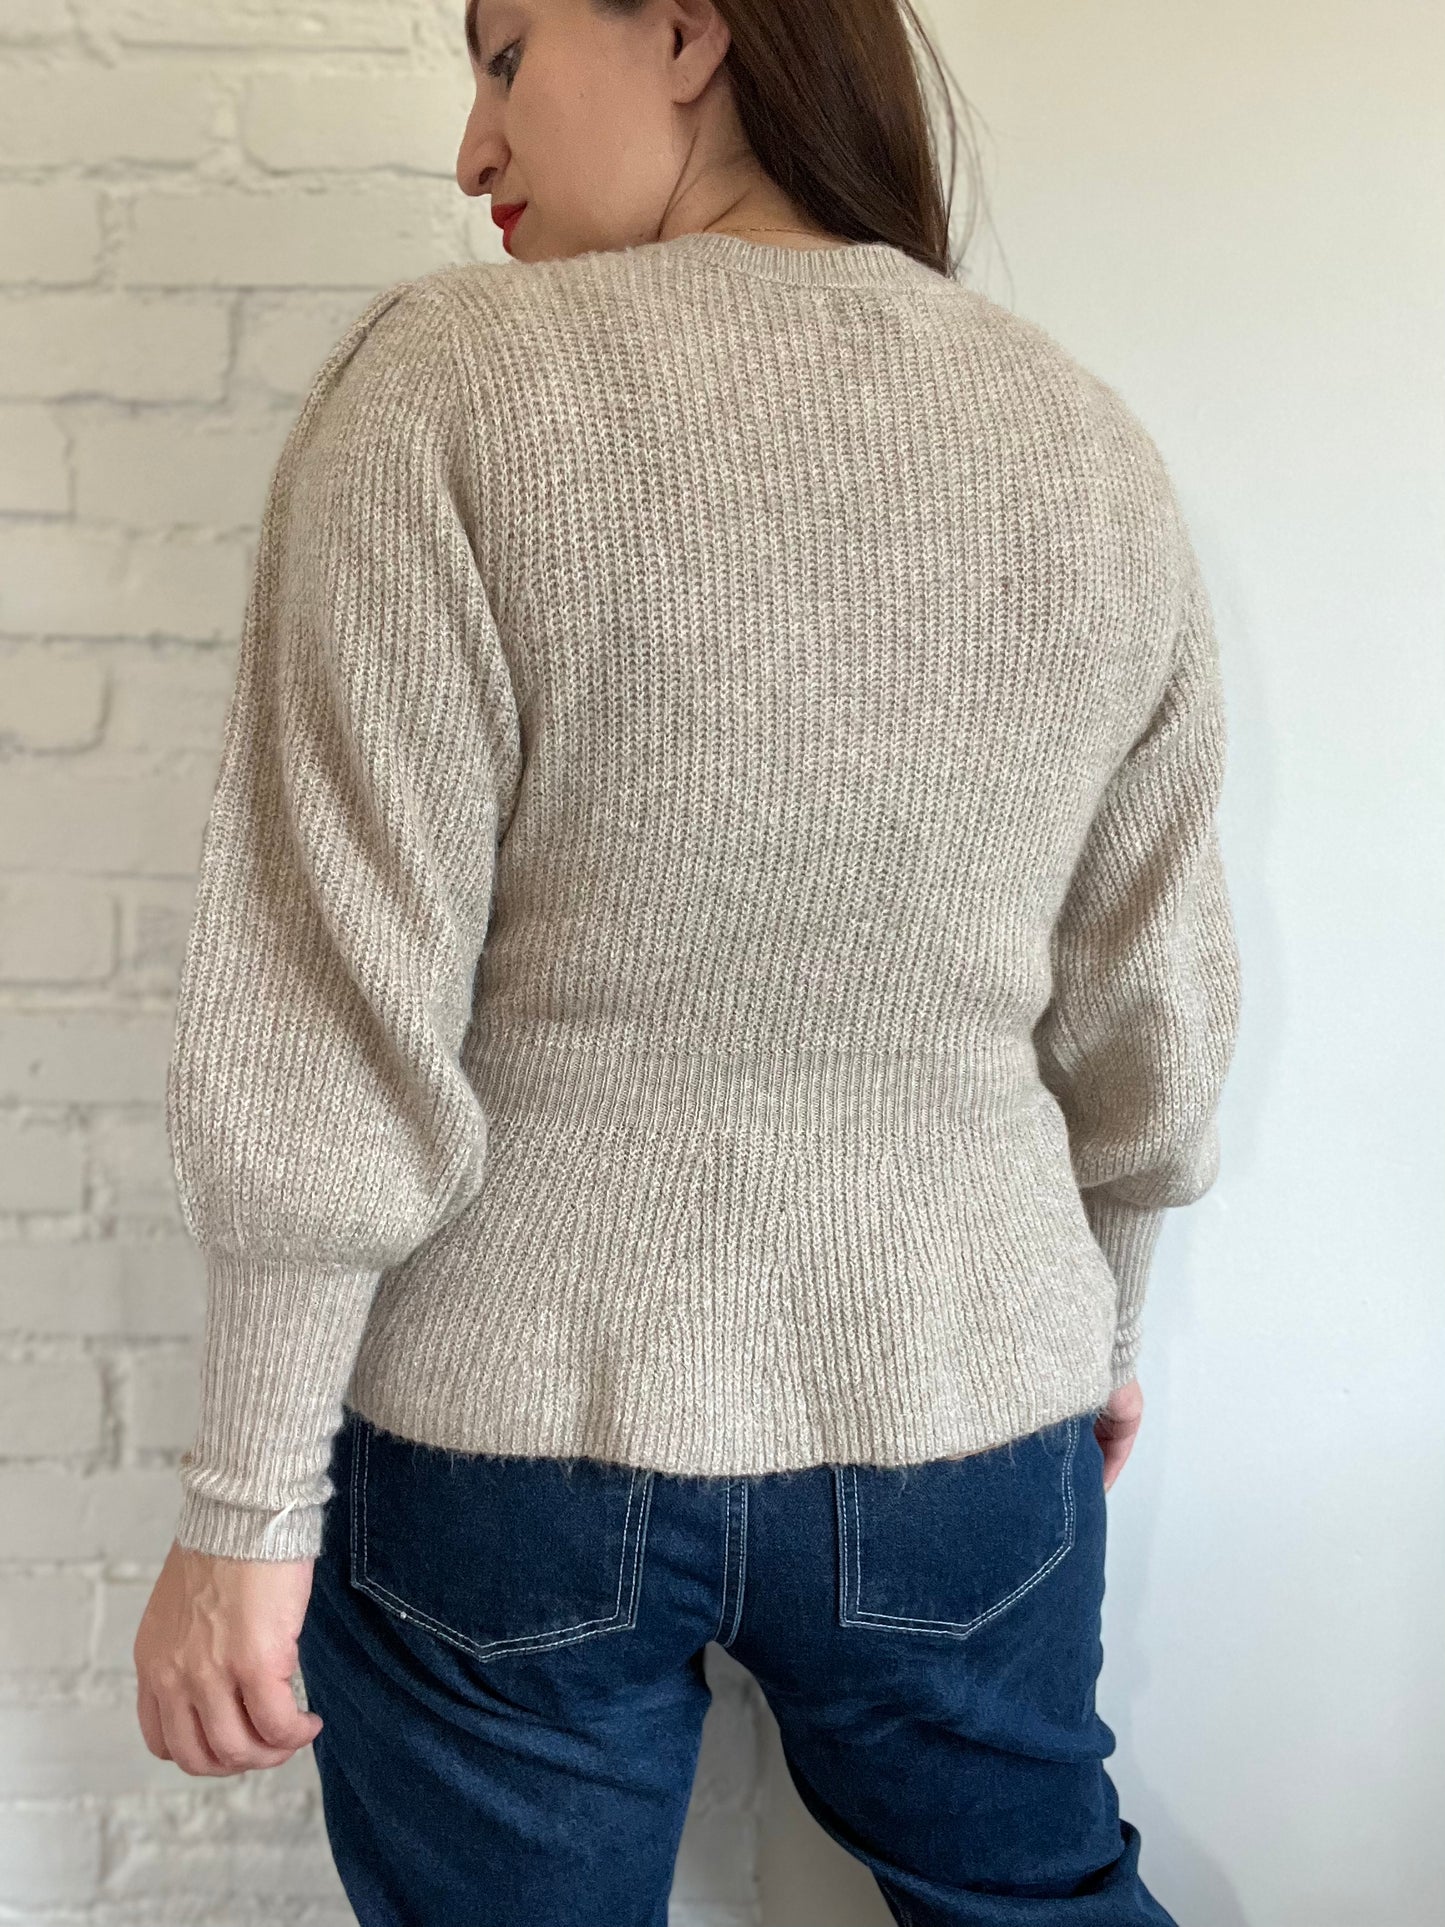 Toasted Coconut Puff Cardigan - M